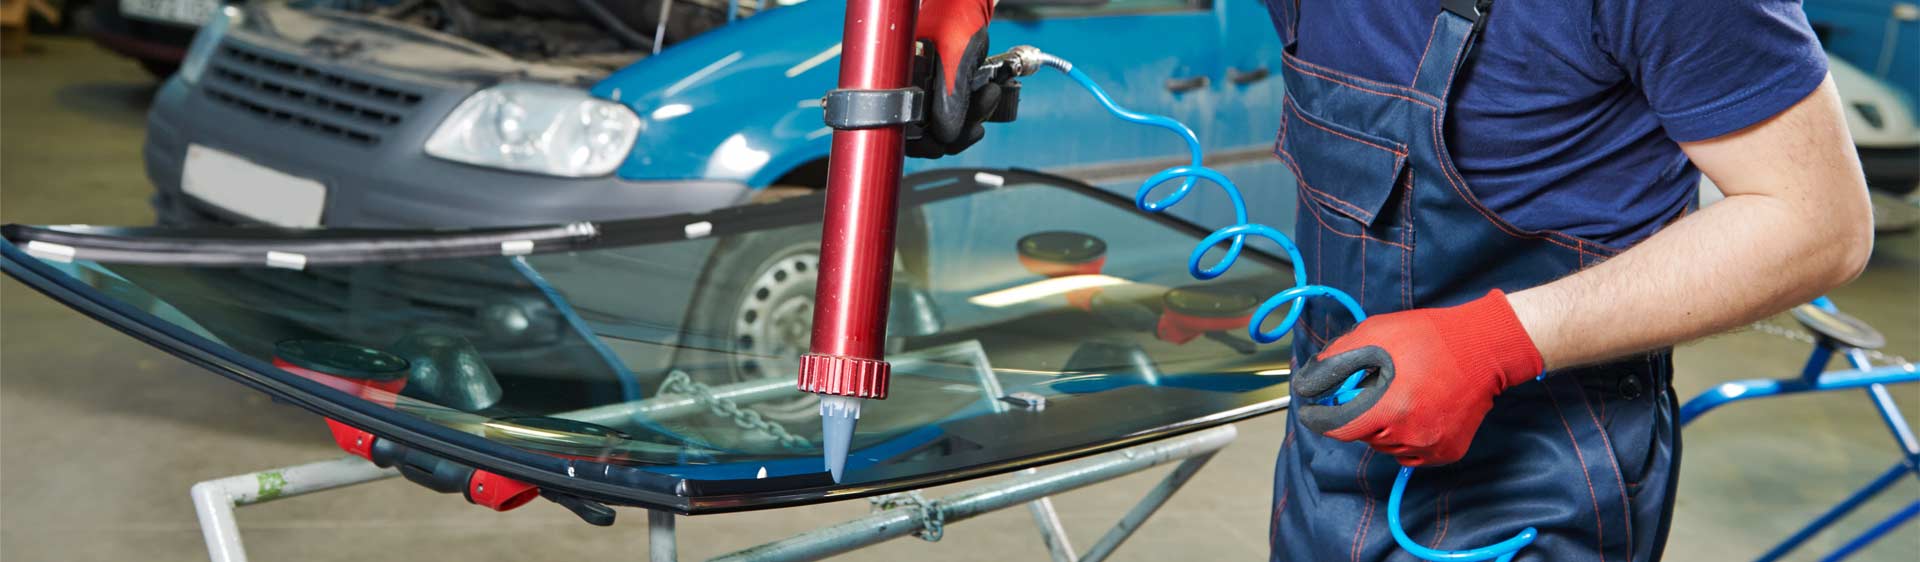 Downey Windshield Repair, Windshield Replacement and Auto Glass Repair